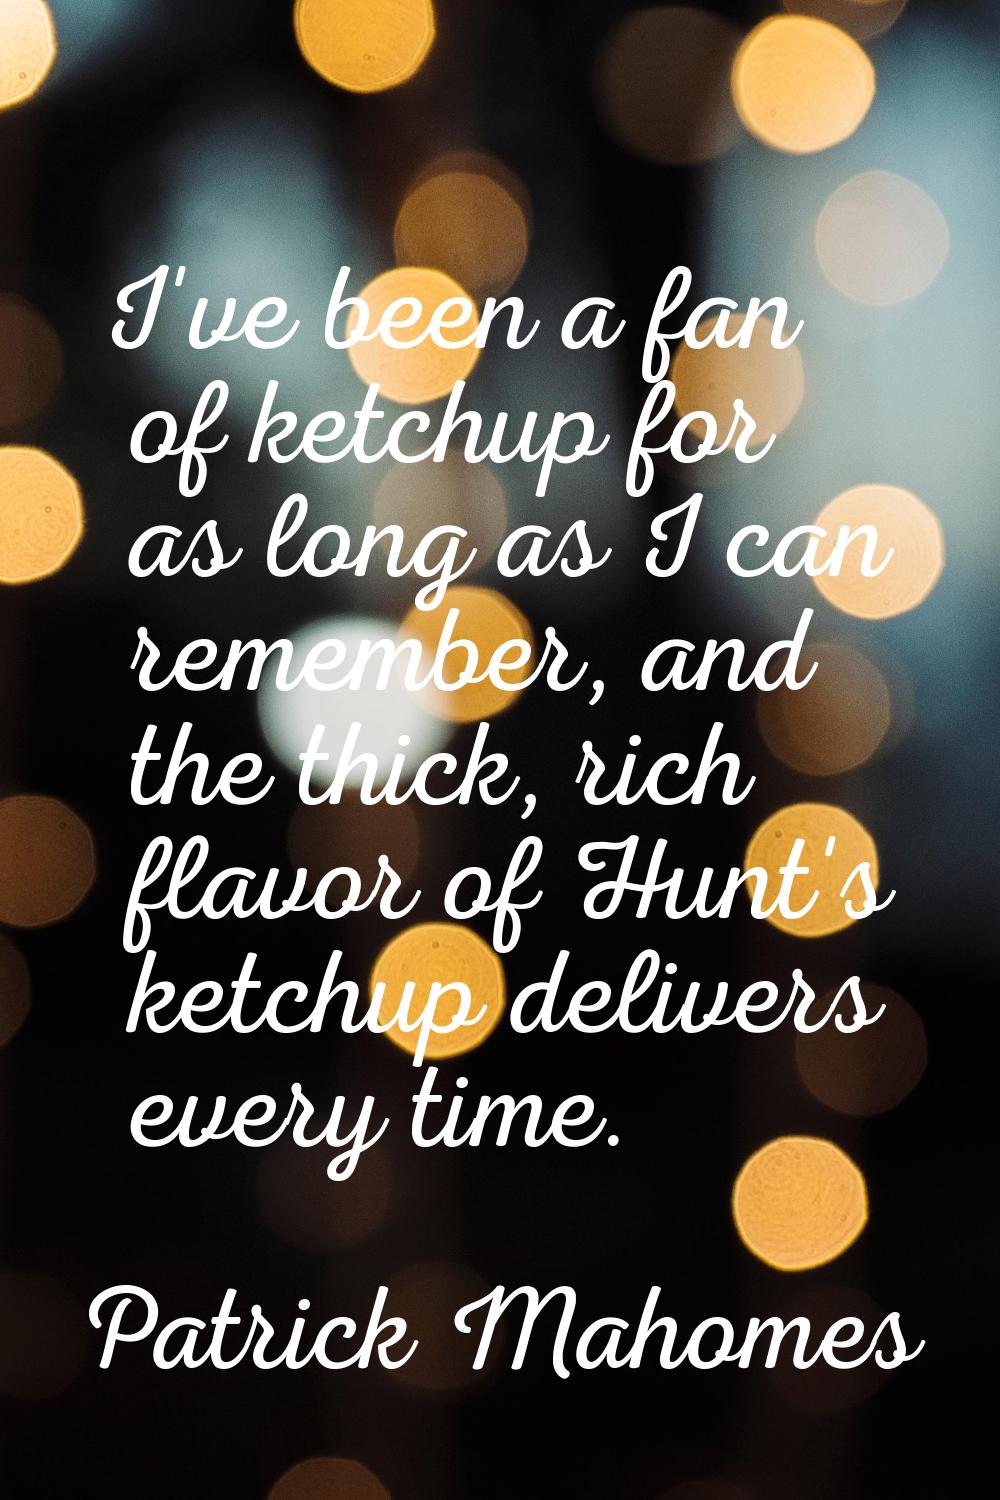 I've been a fan of ketchup for as long as I can remember, and the thick, rich flavor of Hunt's ketc